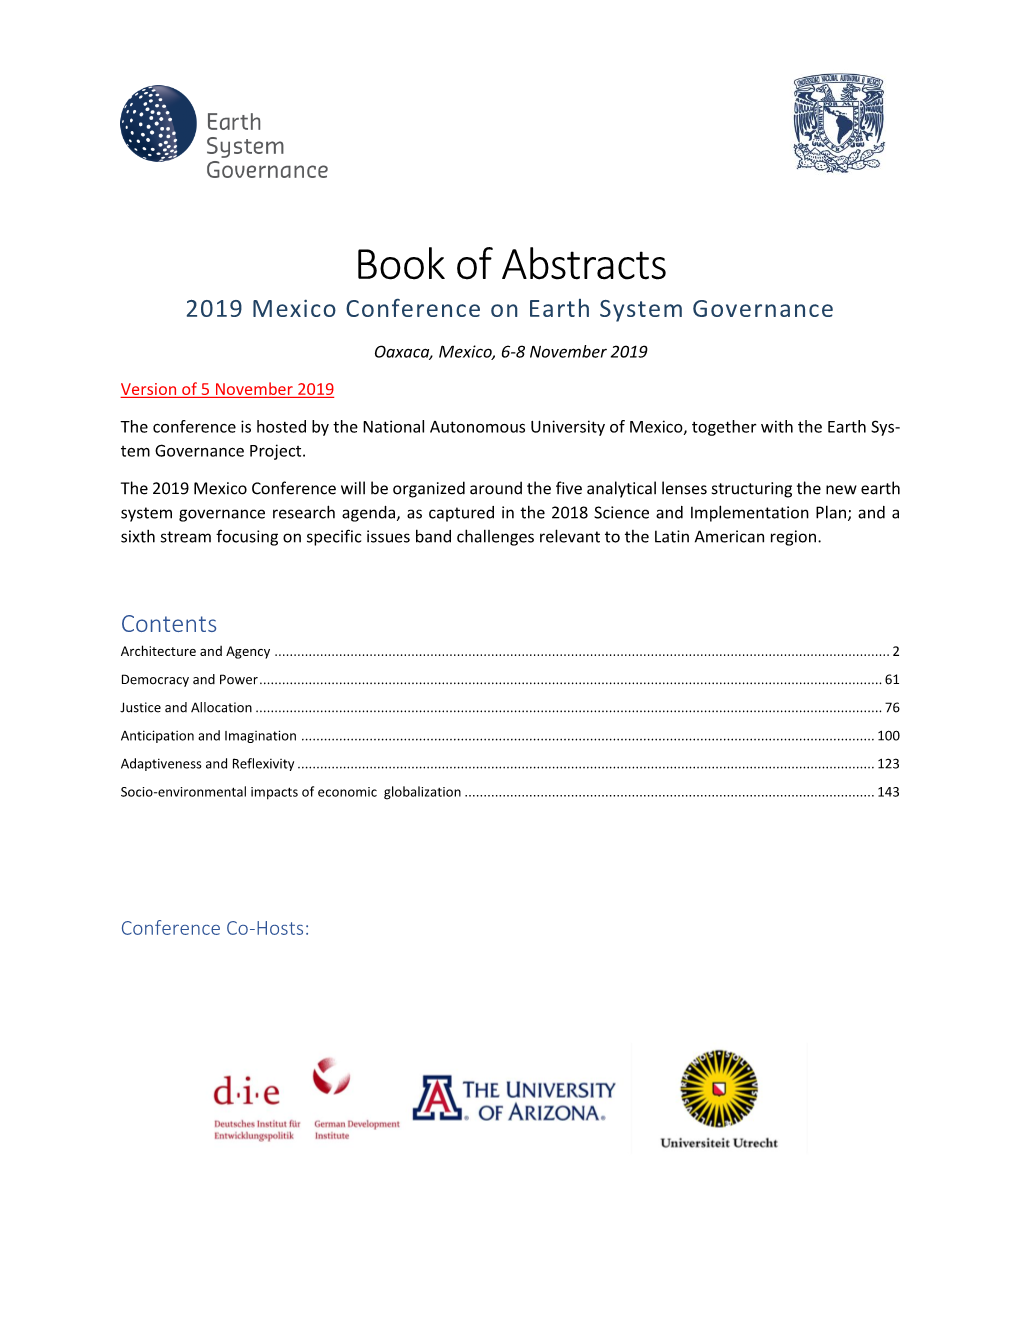 Download the Book of Abstracts Here